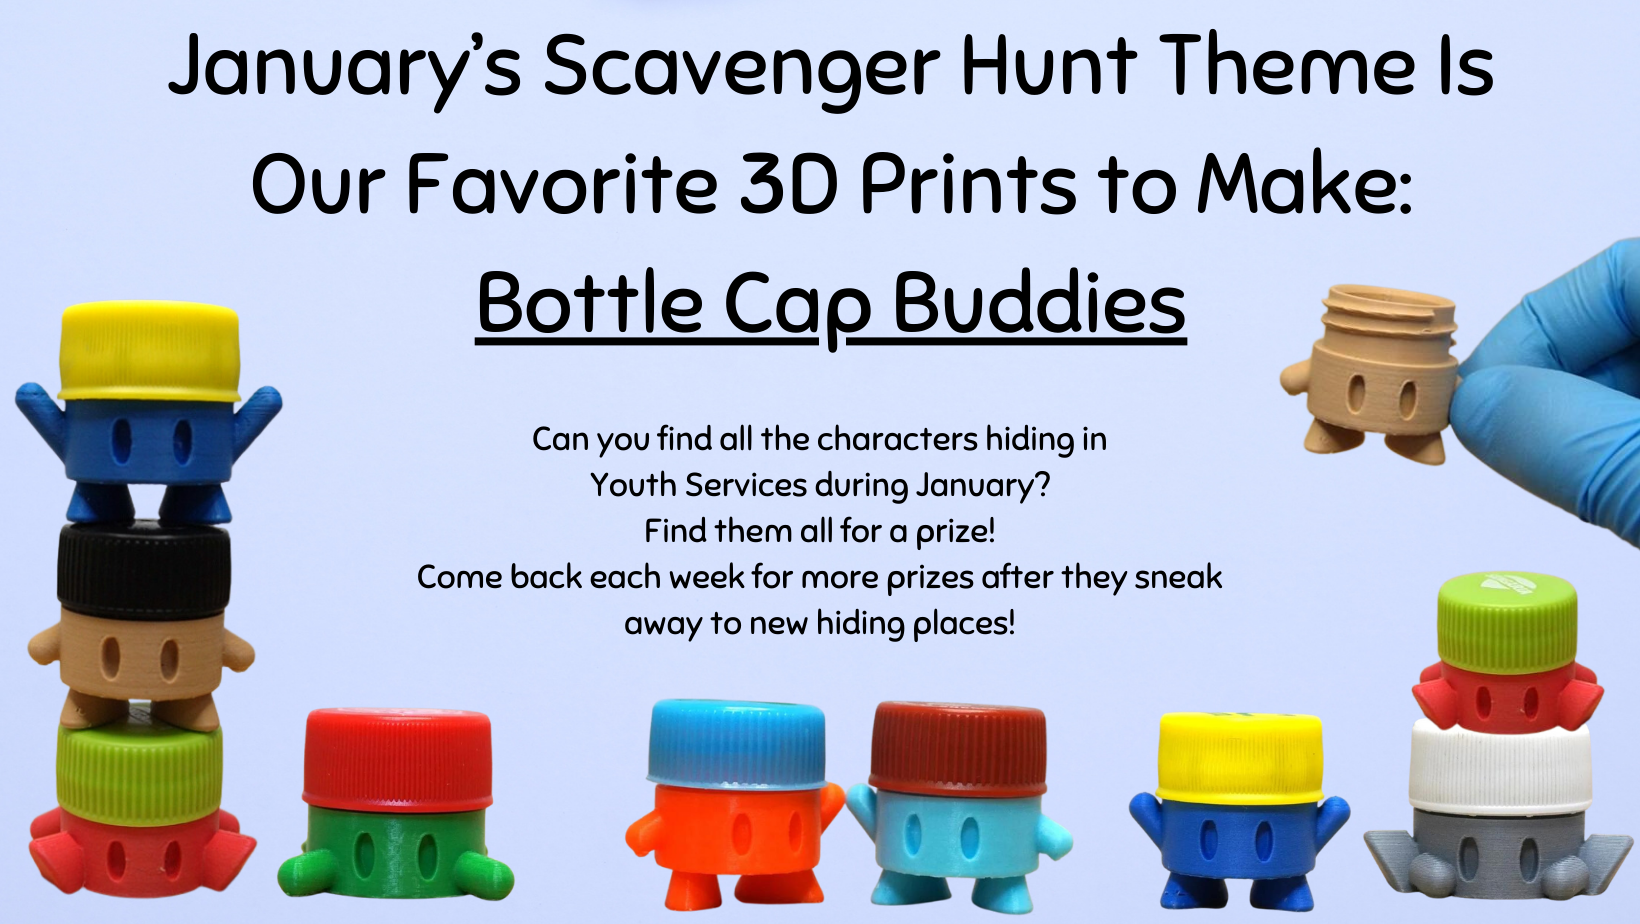 January's scavenger hunt theme is our favorite 3D prints to make: Bottle Cap Buddies